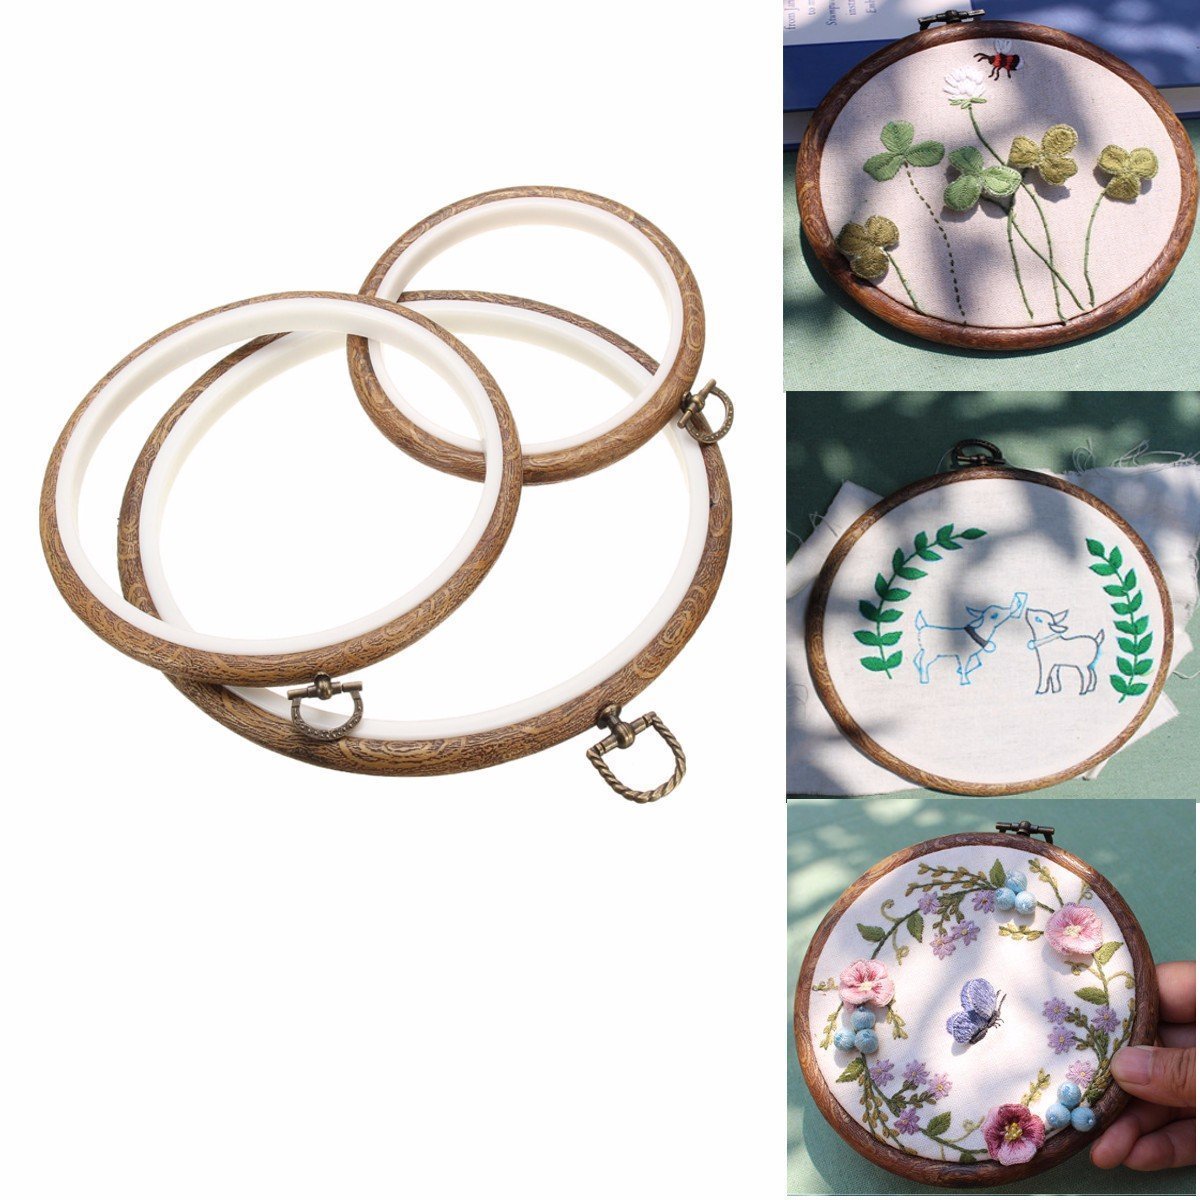 3 Pieces Vintage Embroidery Hoops